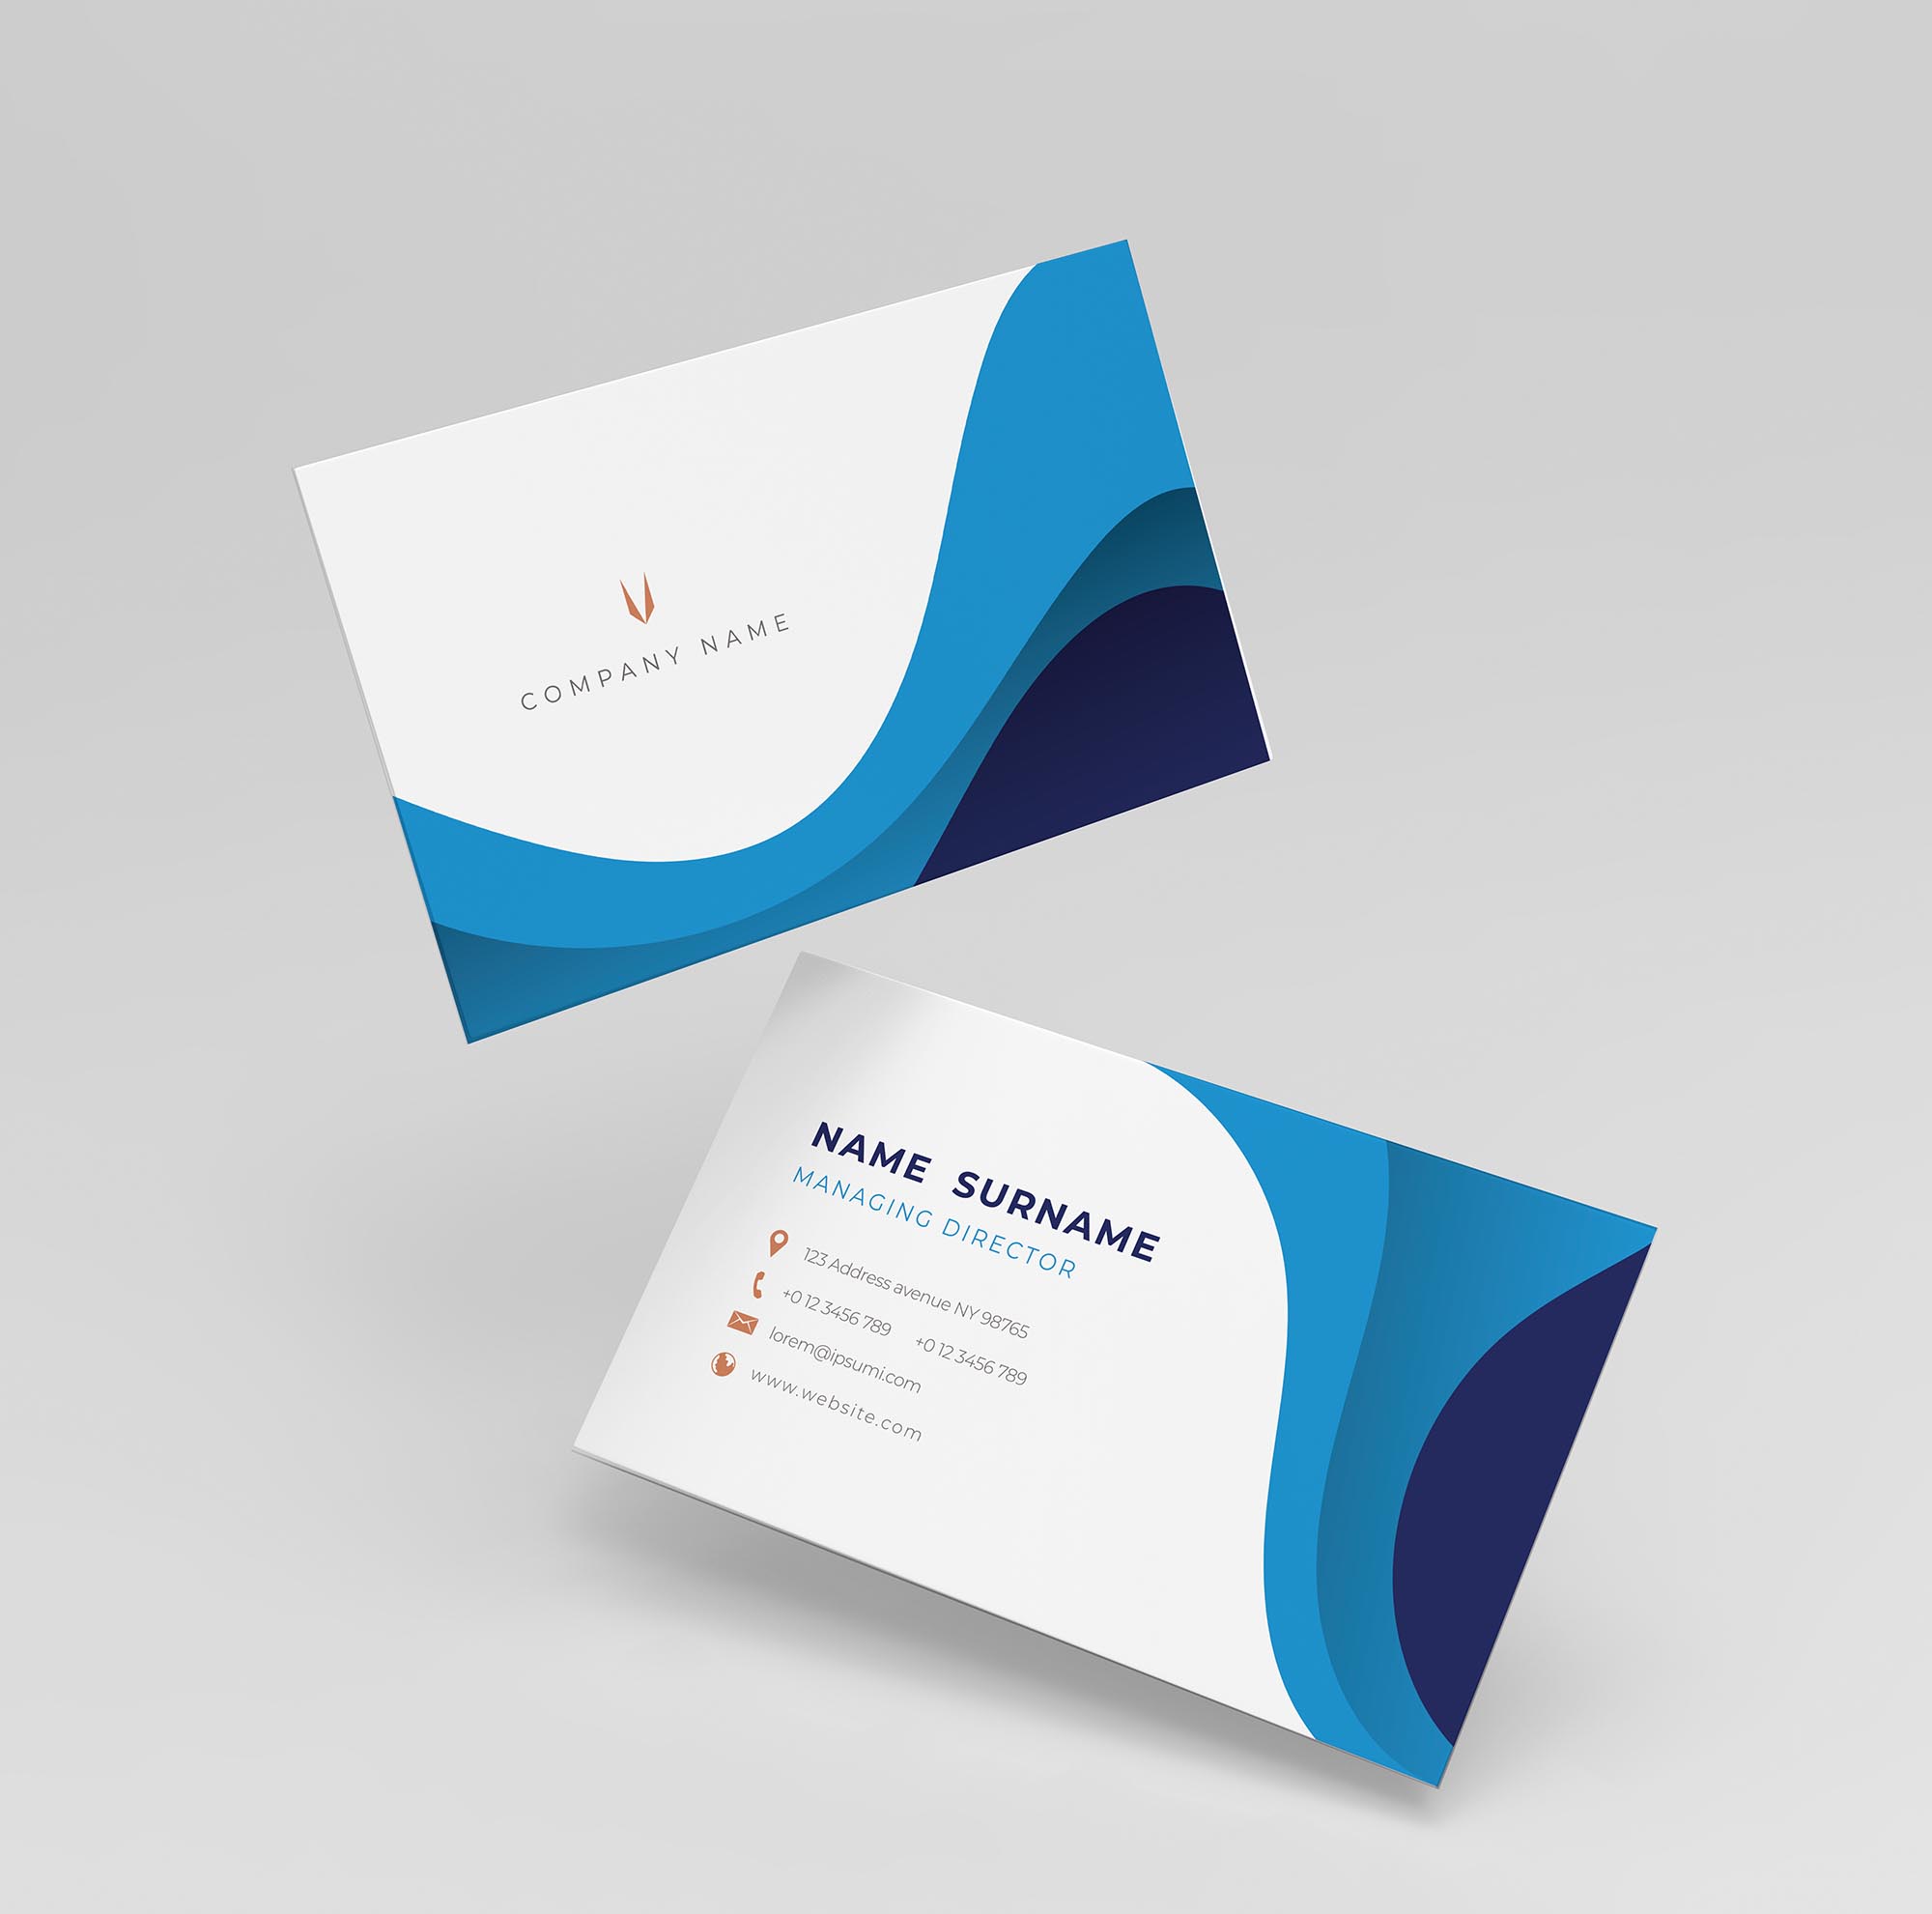 corporate cards vs business cards 2